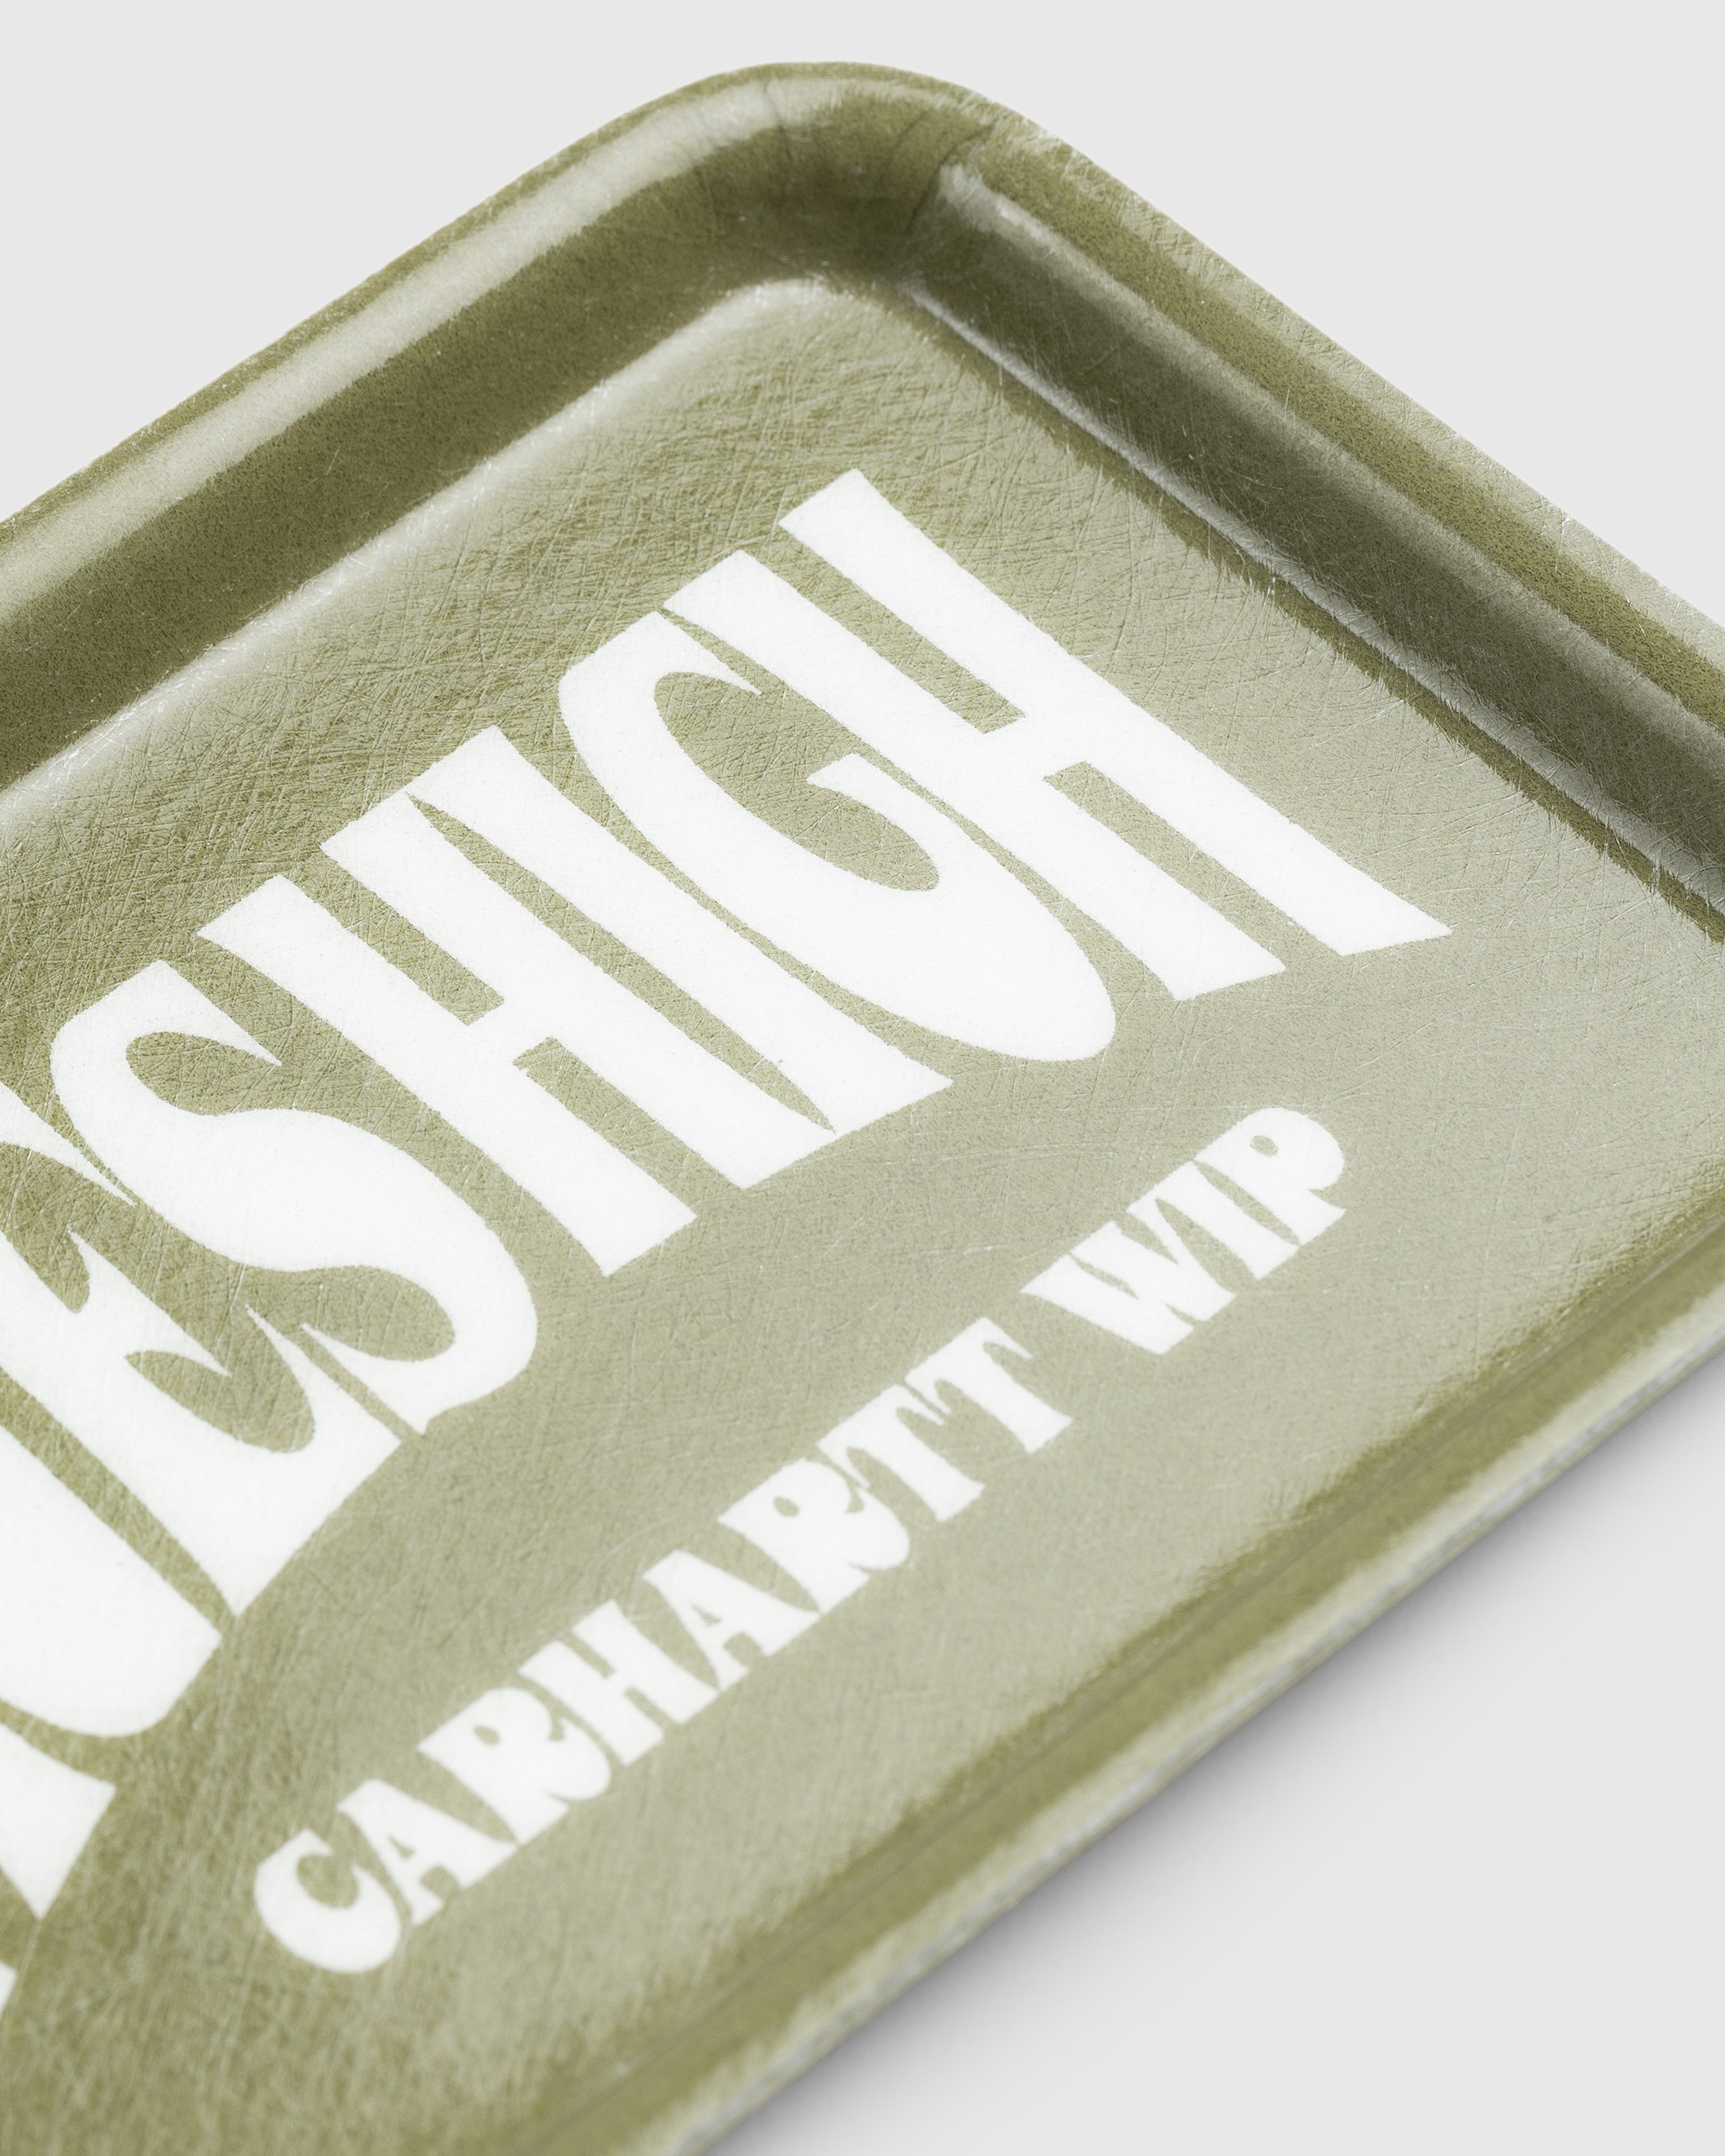 Carhartt WIP - Aces Mini Camtray® - Lifestyle - Green - Image 3